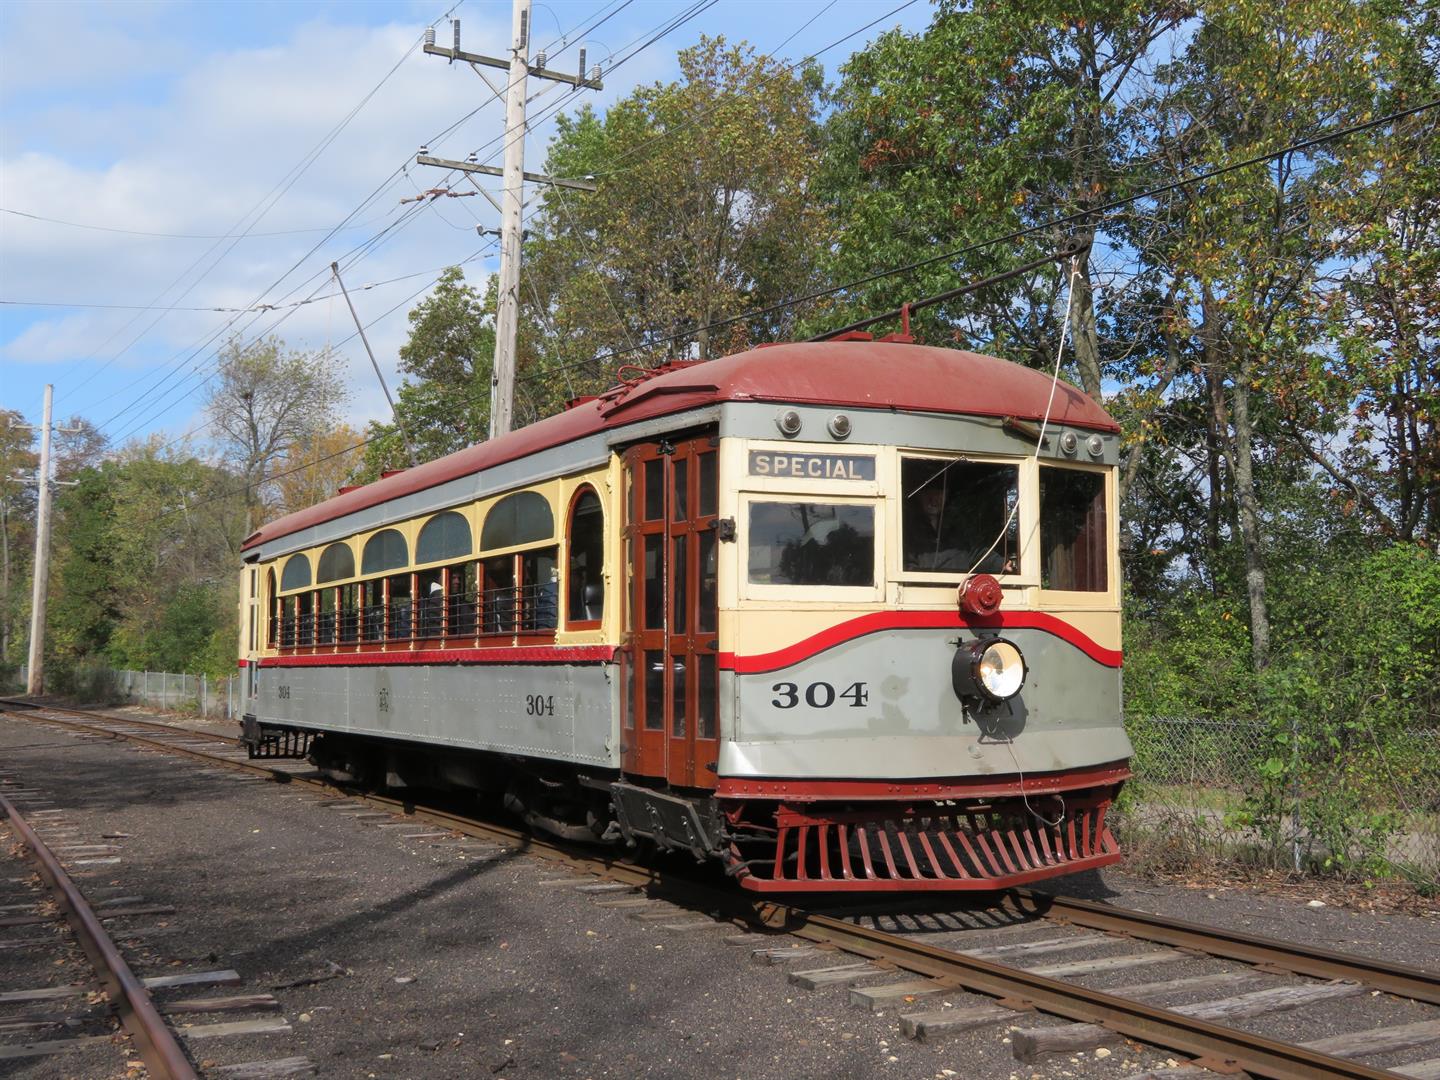 1924 Fox River Electric Intercity Trolley car heads south at Coleman, IL